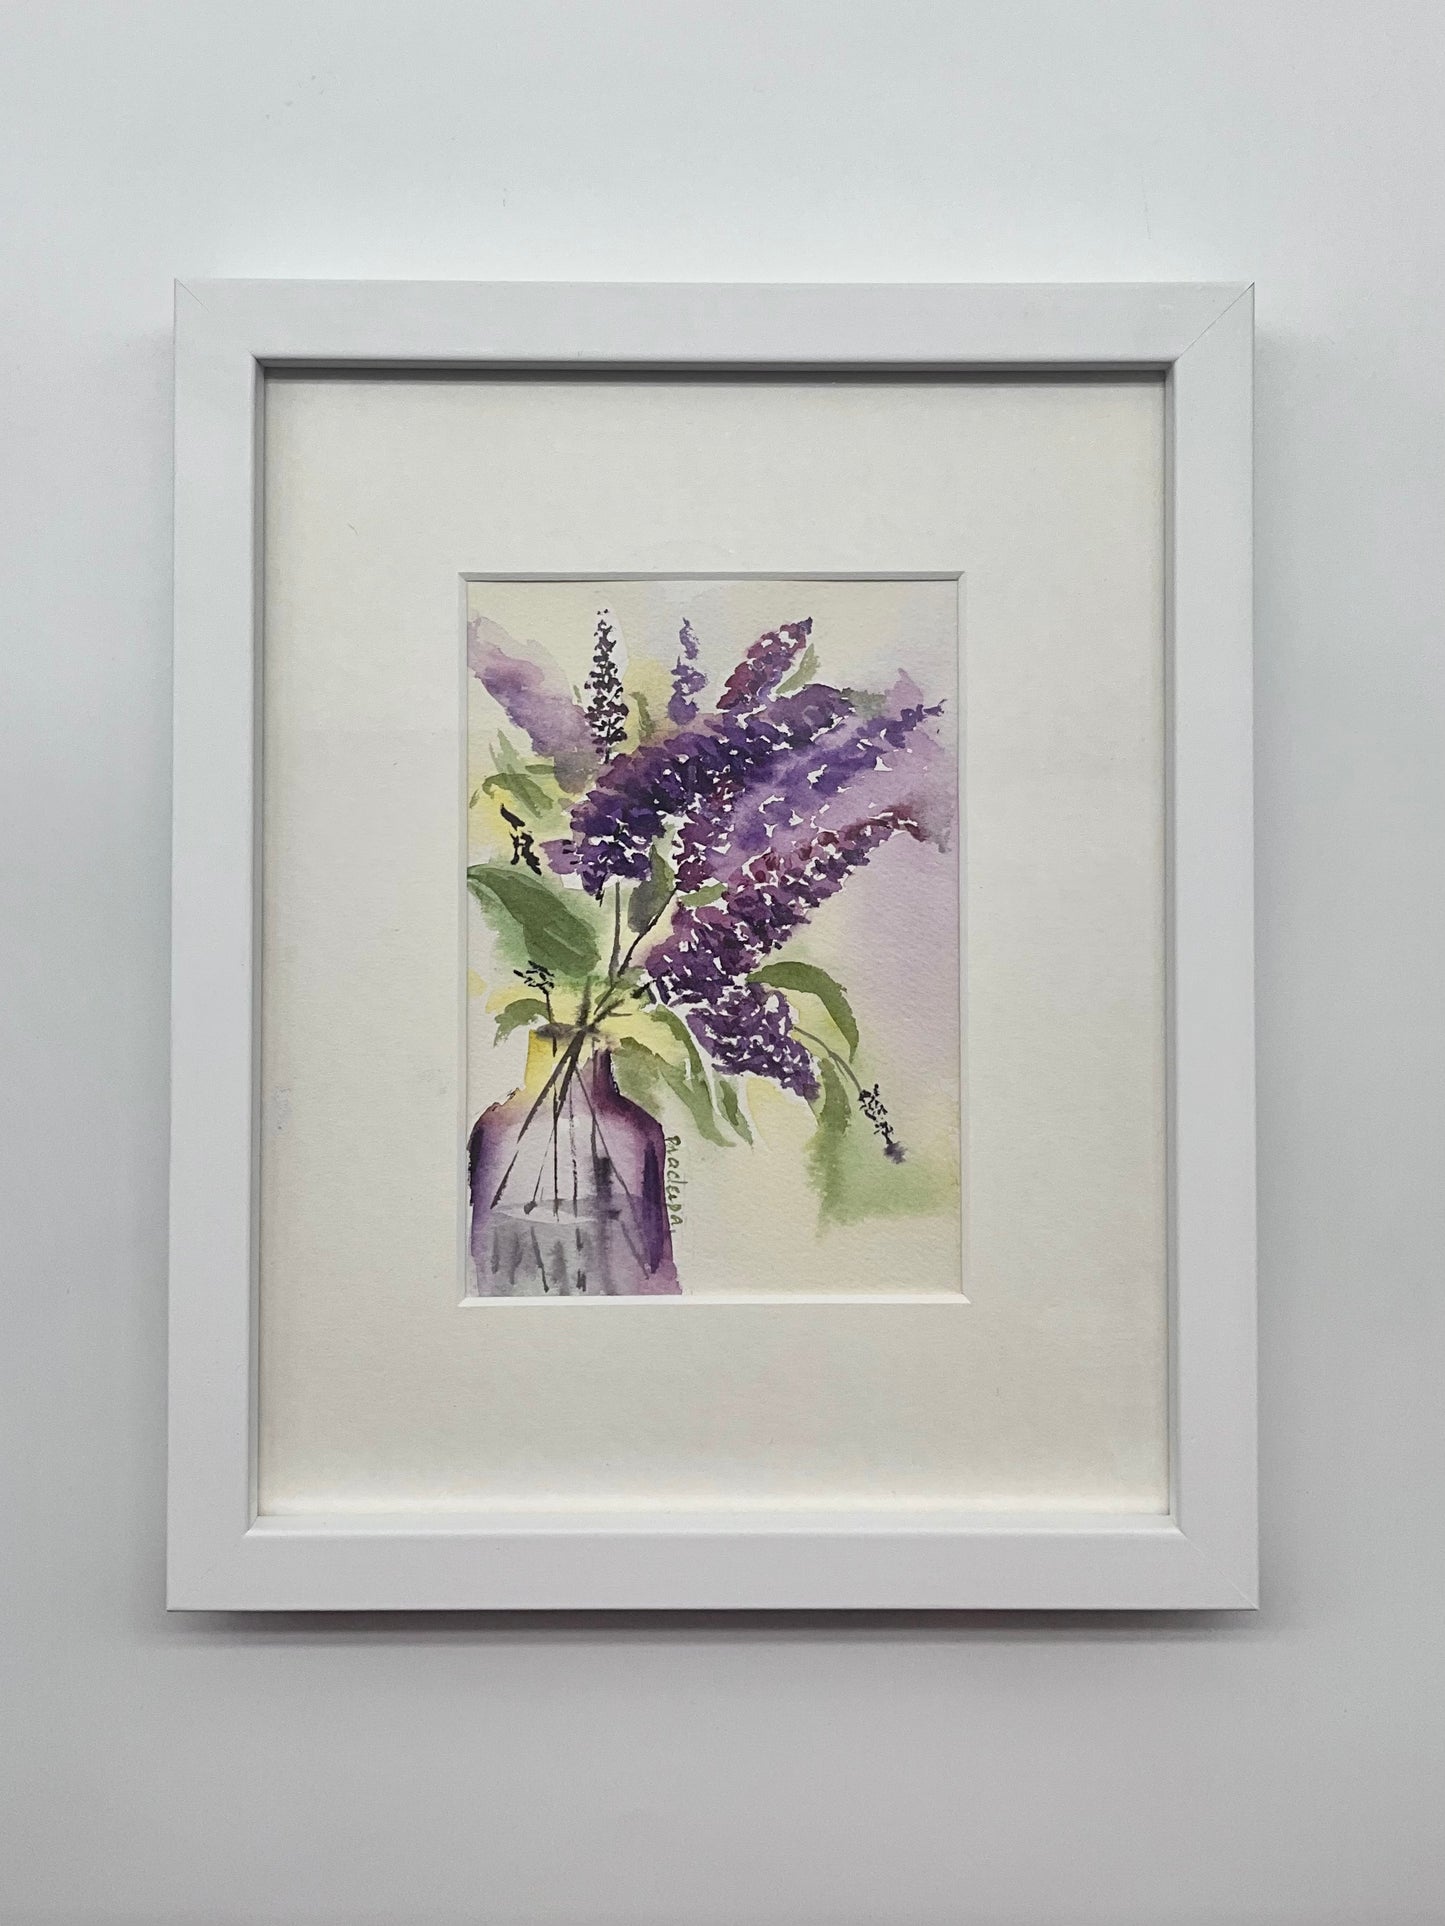 Lively Buddleia - original watercolour painting